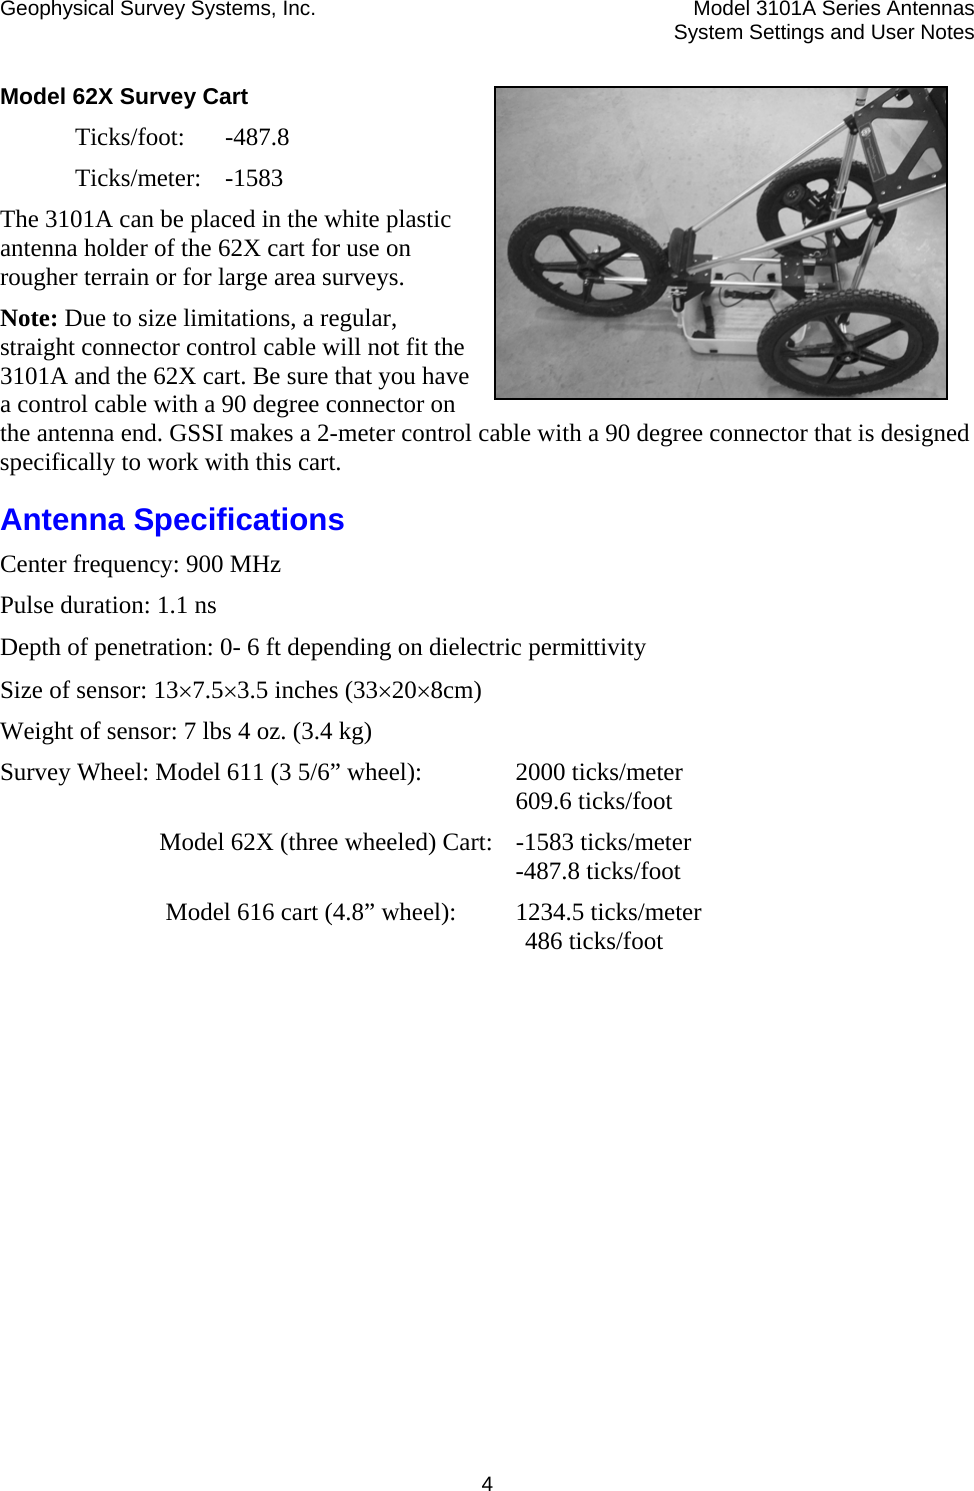 Geophysical Survey Systems, Inc.  Model 3101A Series Antennas  System Settings and User Notes  4Model 62X Survey Cart  Ticks/foot: -487.8  Ticks/meter: -1583 The 3101A can be placed in the white plastic antenna holder of the 62X cart for use on rougher terrain or for large area surveys.  Note: Due to size limitations, a regular, straight connector control cable will not fit the 3101A and the 62X cart. Be sure that you have a control cable with a 90 degree connector on the antenna end. GSSI makes a 2-meter control cable with a 90 degree connector that is designed specifically to work with this cart.  Antenna Specifications Center frequency: 900 MHz Pulse duration: 1.1 ns Depth of penetration: 0- 6 ft depending on dielectric permittivity  Size of sensor: 13×7.5×3.5 inches (33×20×8cm) Weight of sensor: 7 lbs 4 oz. (3.4 kg) Survey Wheel: Model 611 (3 5/6” wheel):   2000 ticks/meter    609.6 ticks/foot   Model 62X (three wheeled) Cart:  -1583 ticks/meter    -487.8 ticks/foot    Model 616 cart (4.8” wheel):   1234.5 ticks/meter     486 ticks/foot  